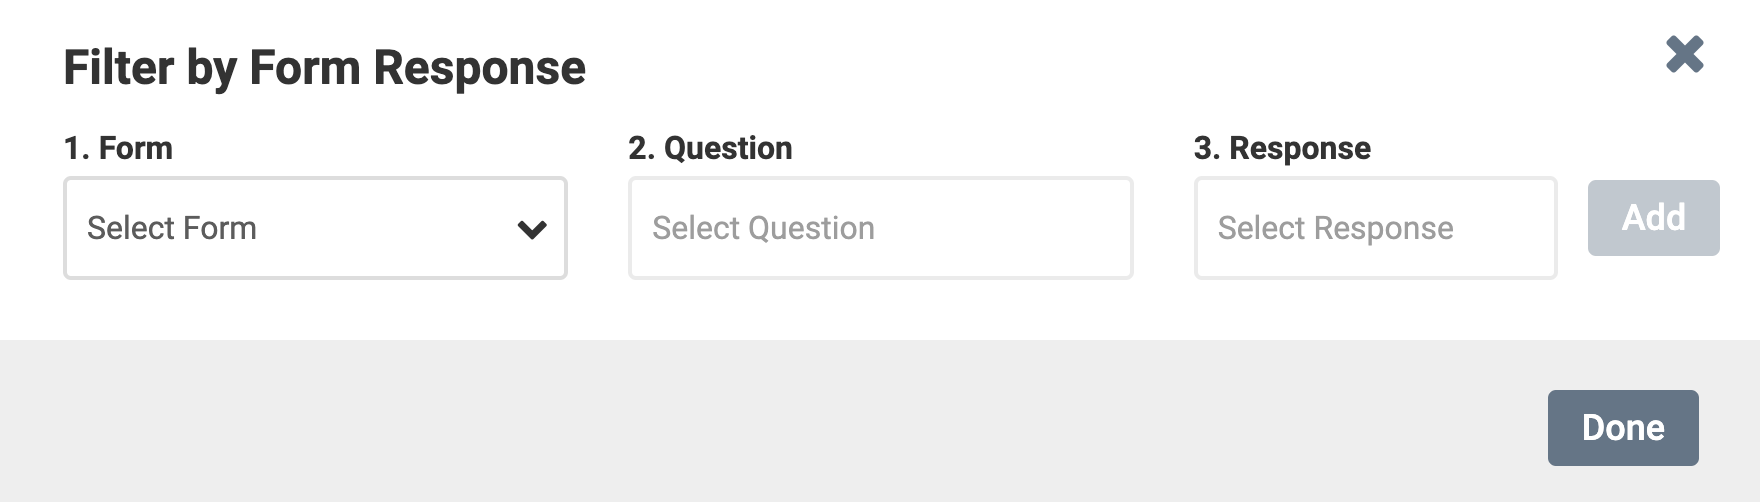 Filter by Form Responses section with Form dropdown and Question, and Response fields above a Done button